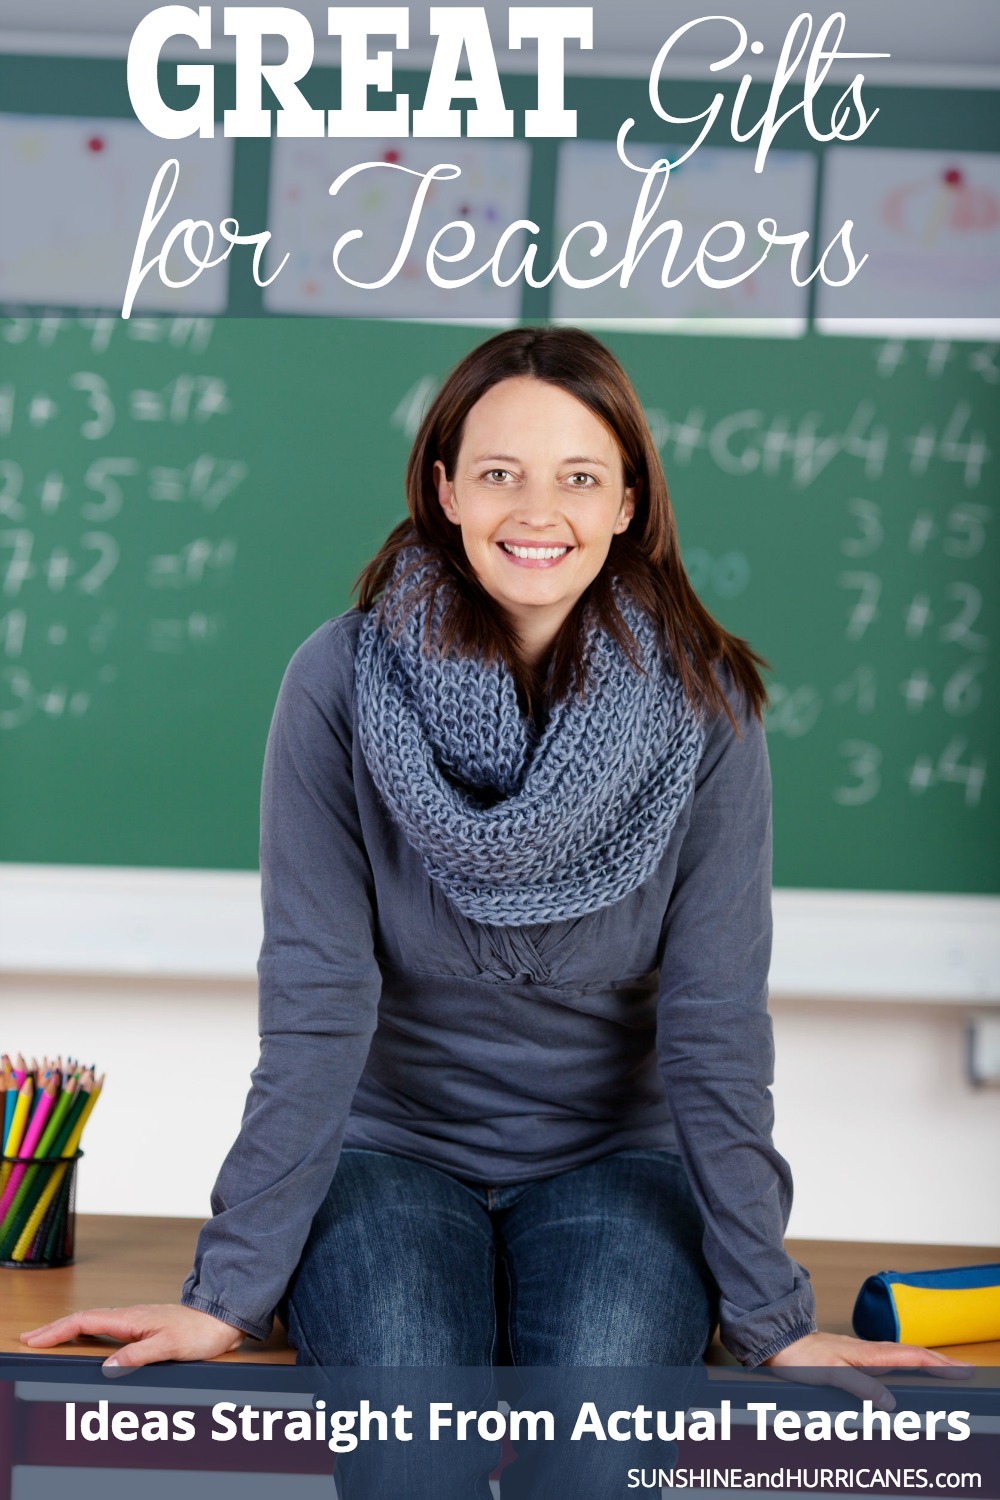 Are you never quite sure what to get your kids teachers for holiday, teacher appreciation or end of year gifts? We talked to all sorts of teachers to get ideas straight from them about what they would most enjoy getting from their students. All their suggestions are collected here to help you pick out the perfect teacher gift this year! Gifts for Teachers. SunshineandHurricanes.com